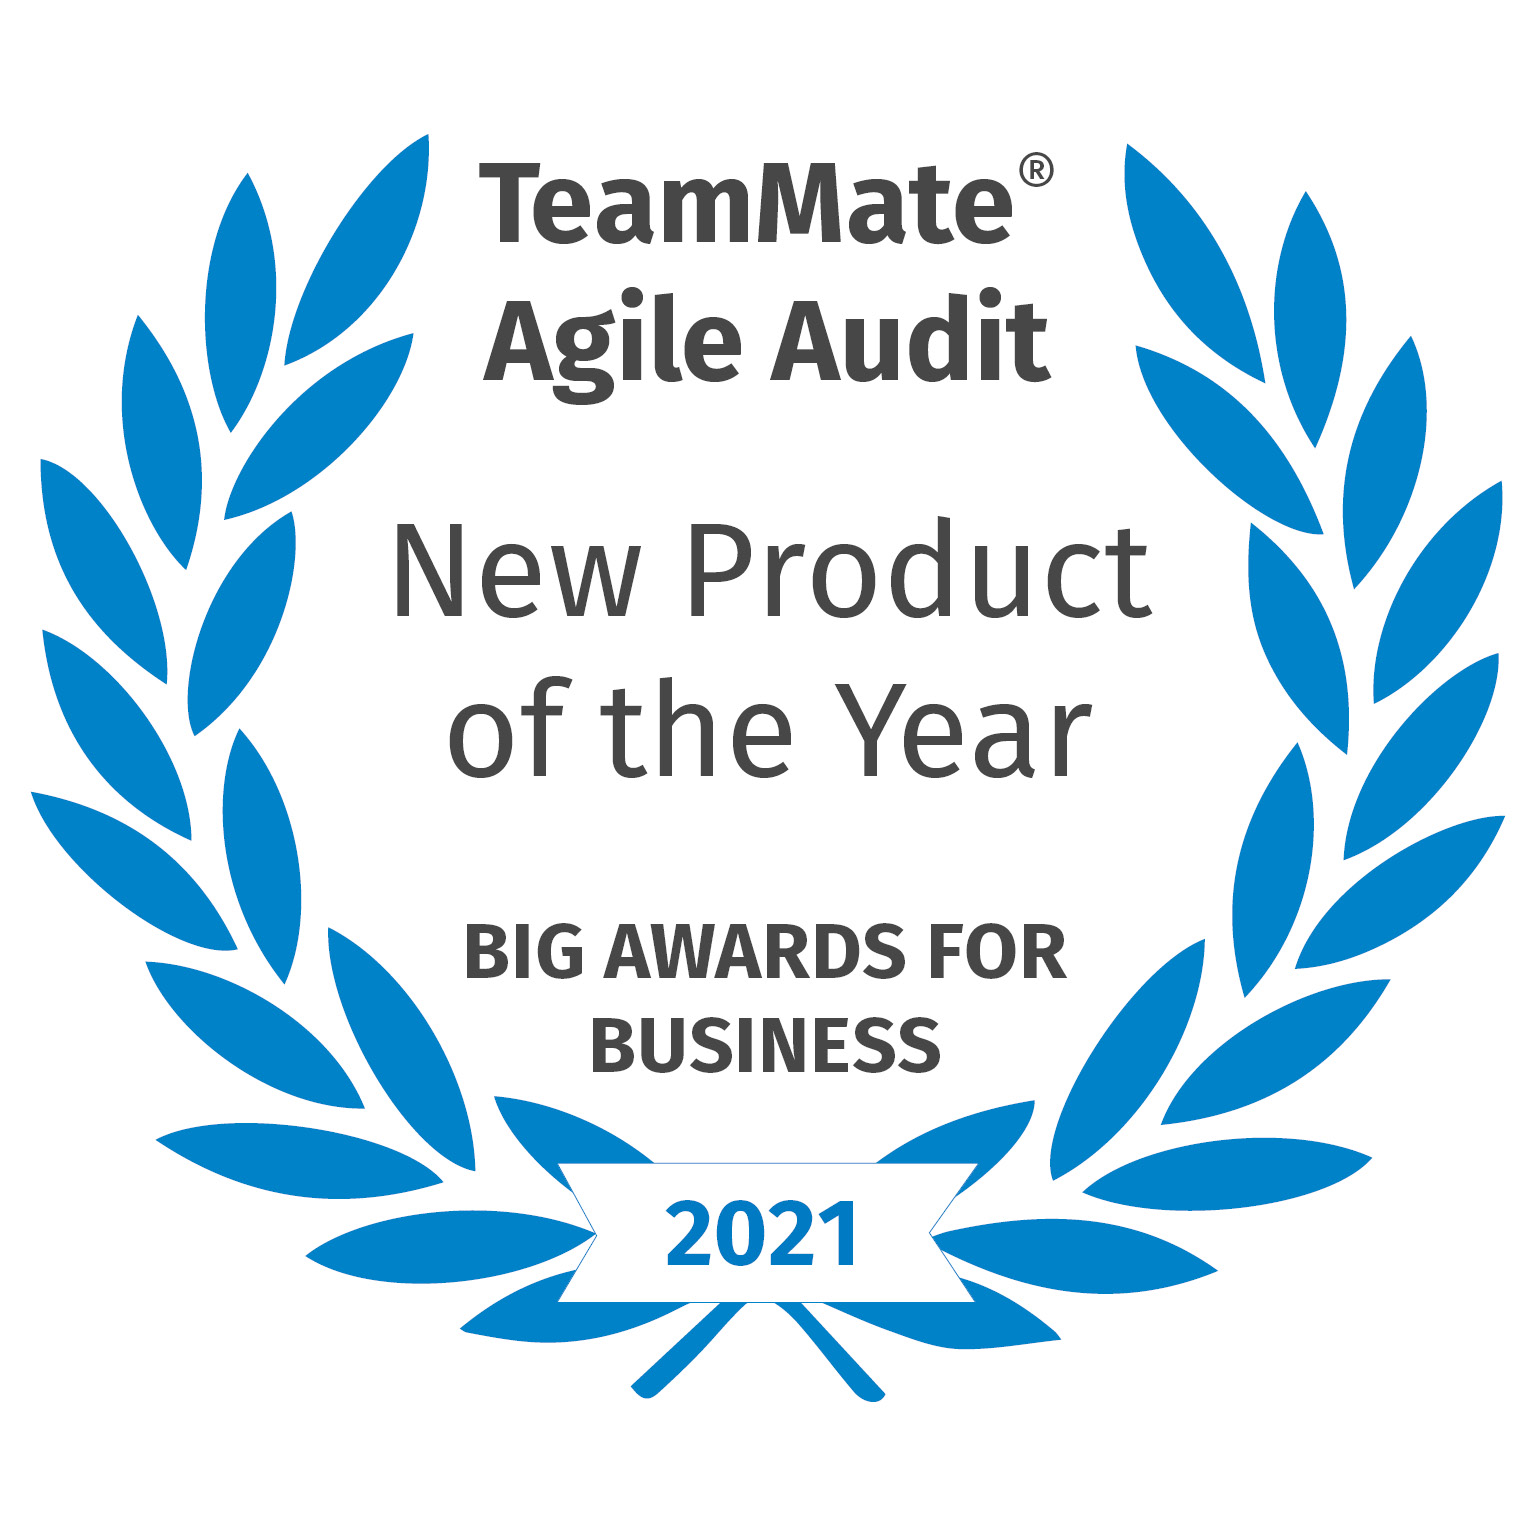 TeamMate+ Agile Audit - New Product of the Year - Big Awards for Business 2021